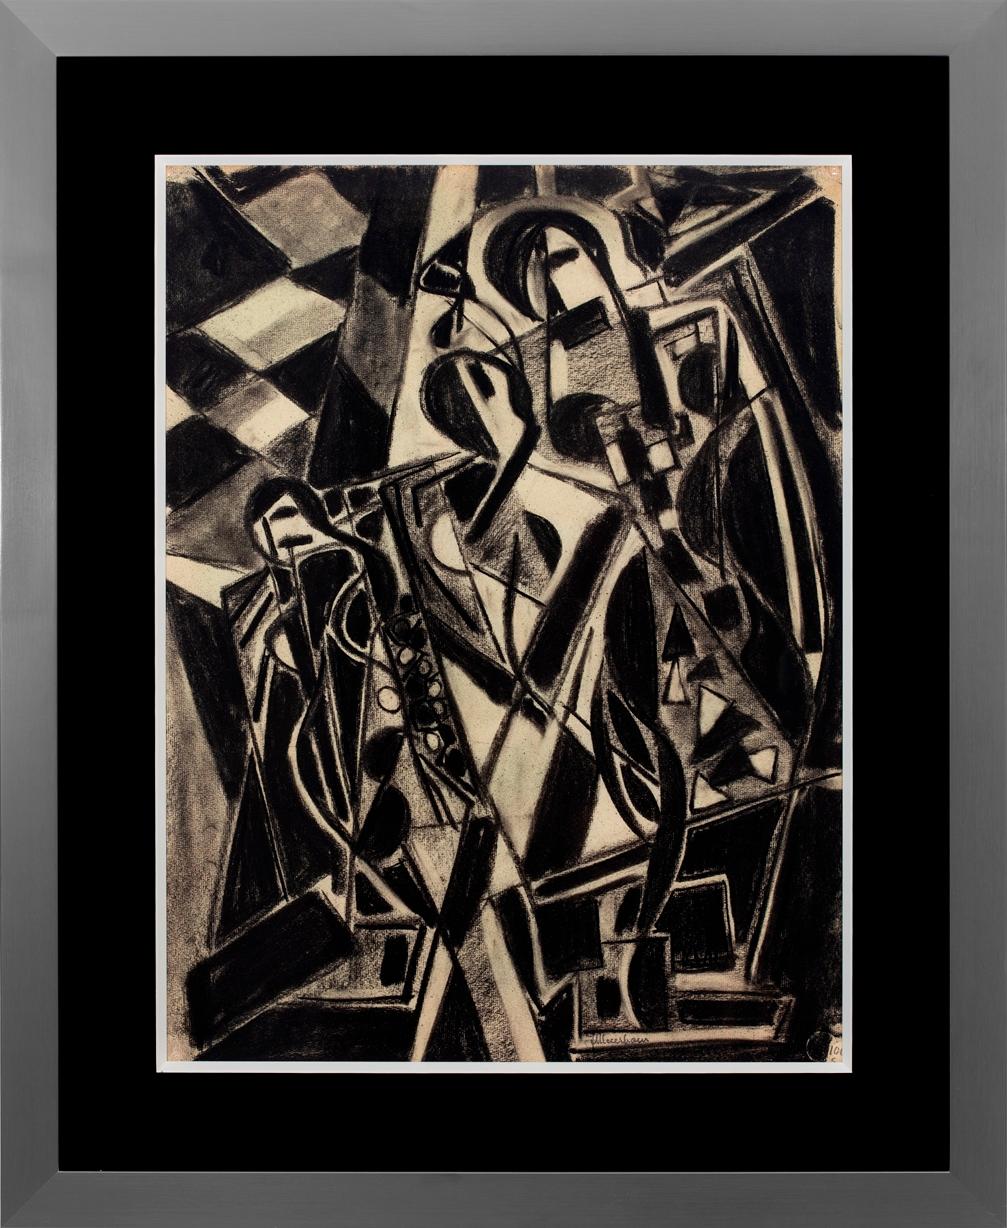 Joseph Meierhans Abstract Drawing - "The Session"